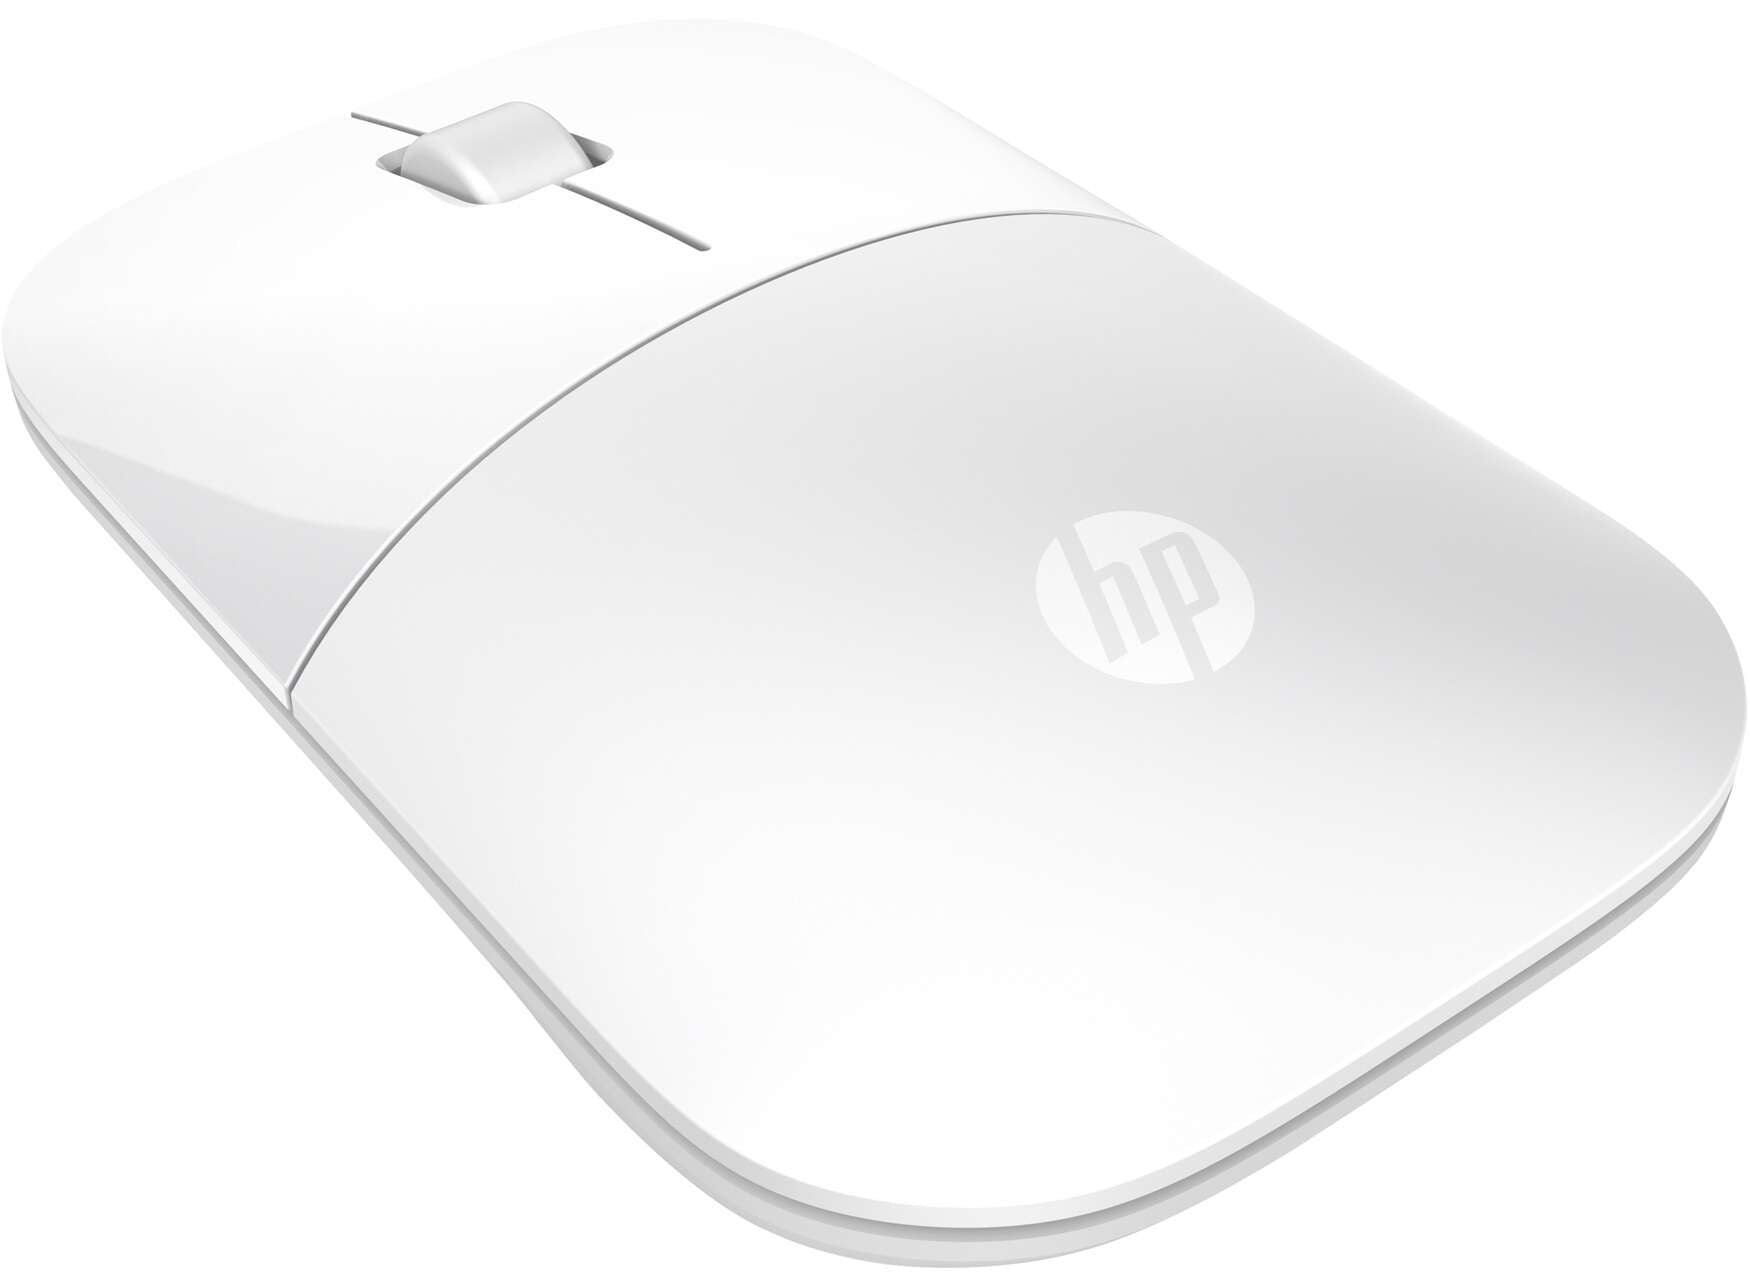 HP Z3700 WIRELESS MOUSE BLACK - Gubudo Consulting